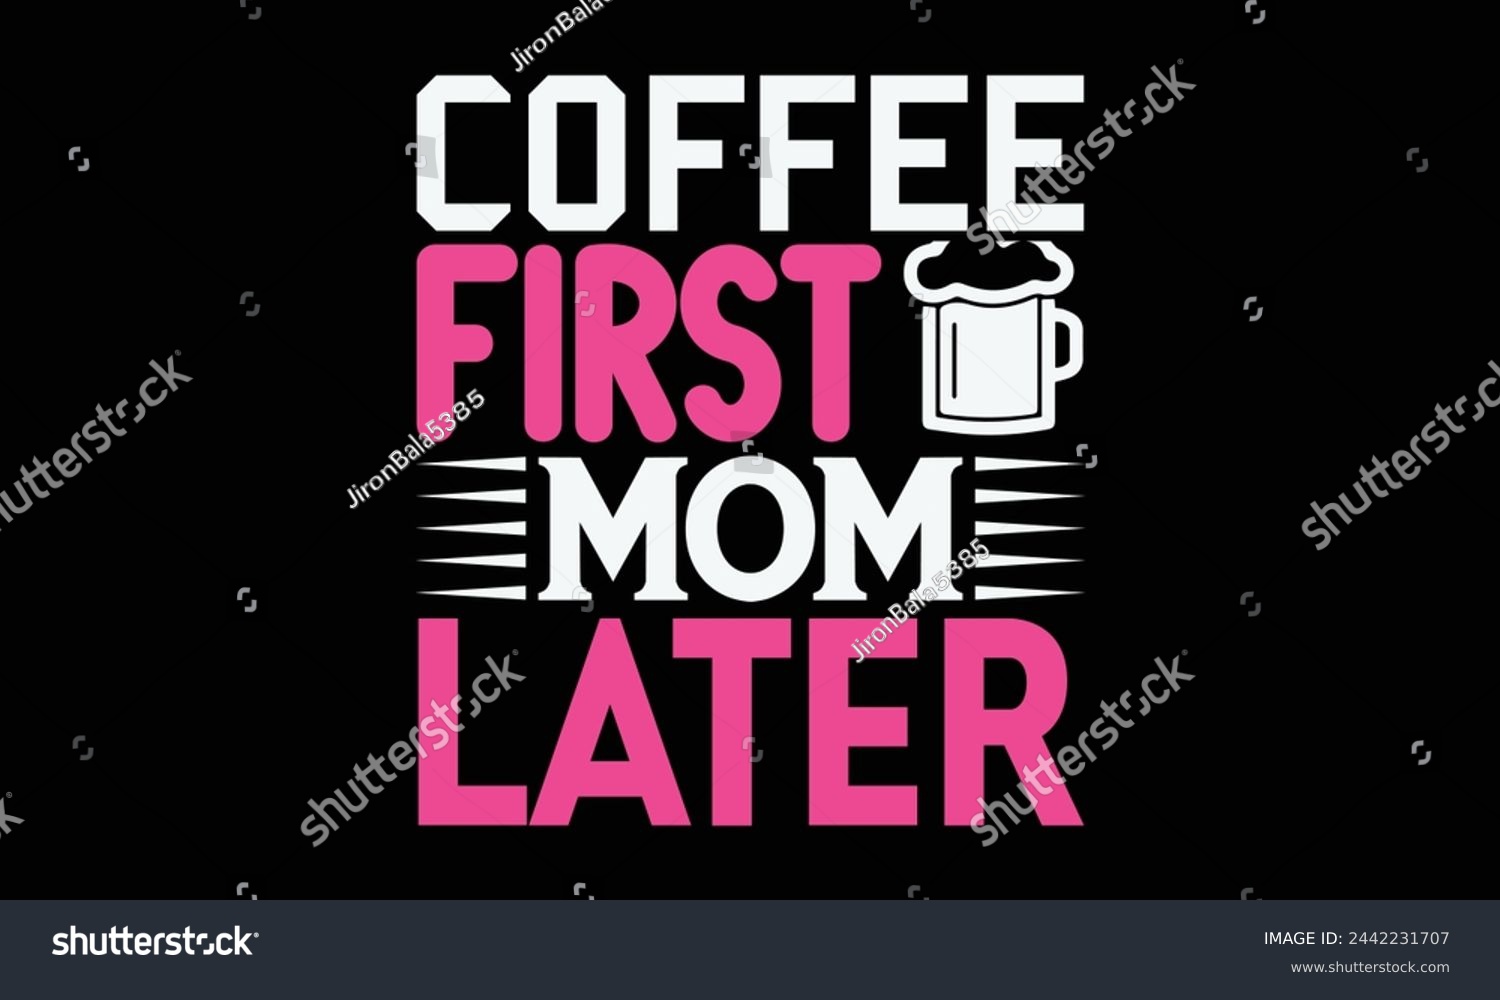 SVG of Coffee first mom later - Mom t-shirt design, isolated on white background, this illustration can be used as a print on t-shirts and bags, cover book, template, stationary or as a poster. svg